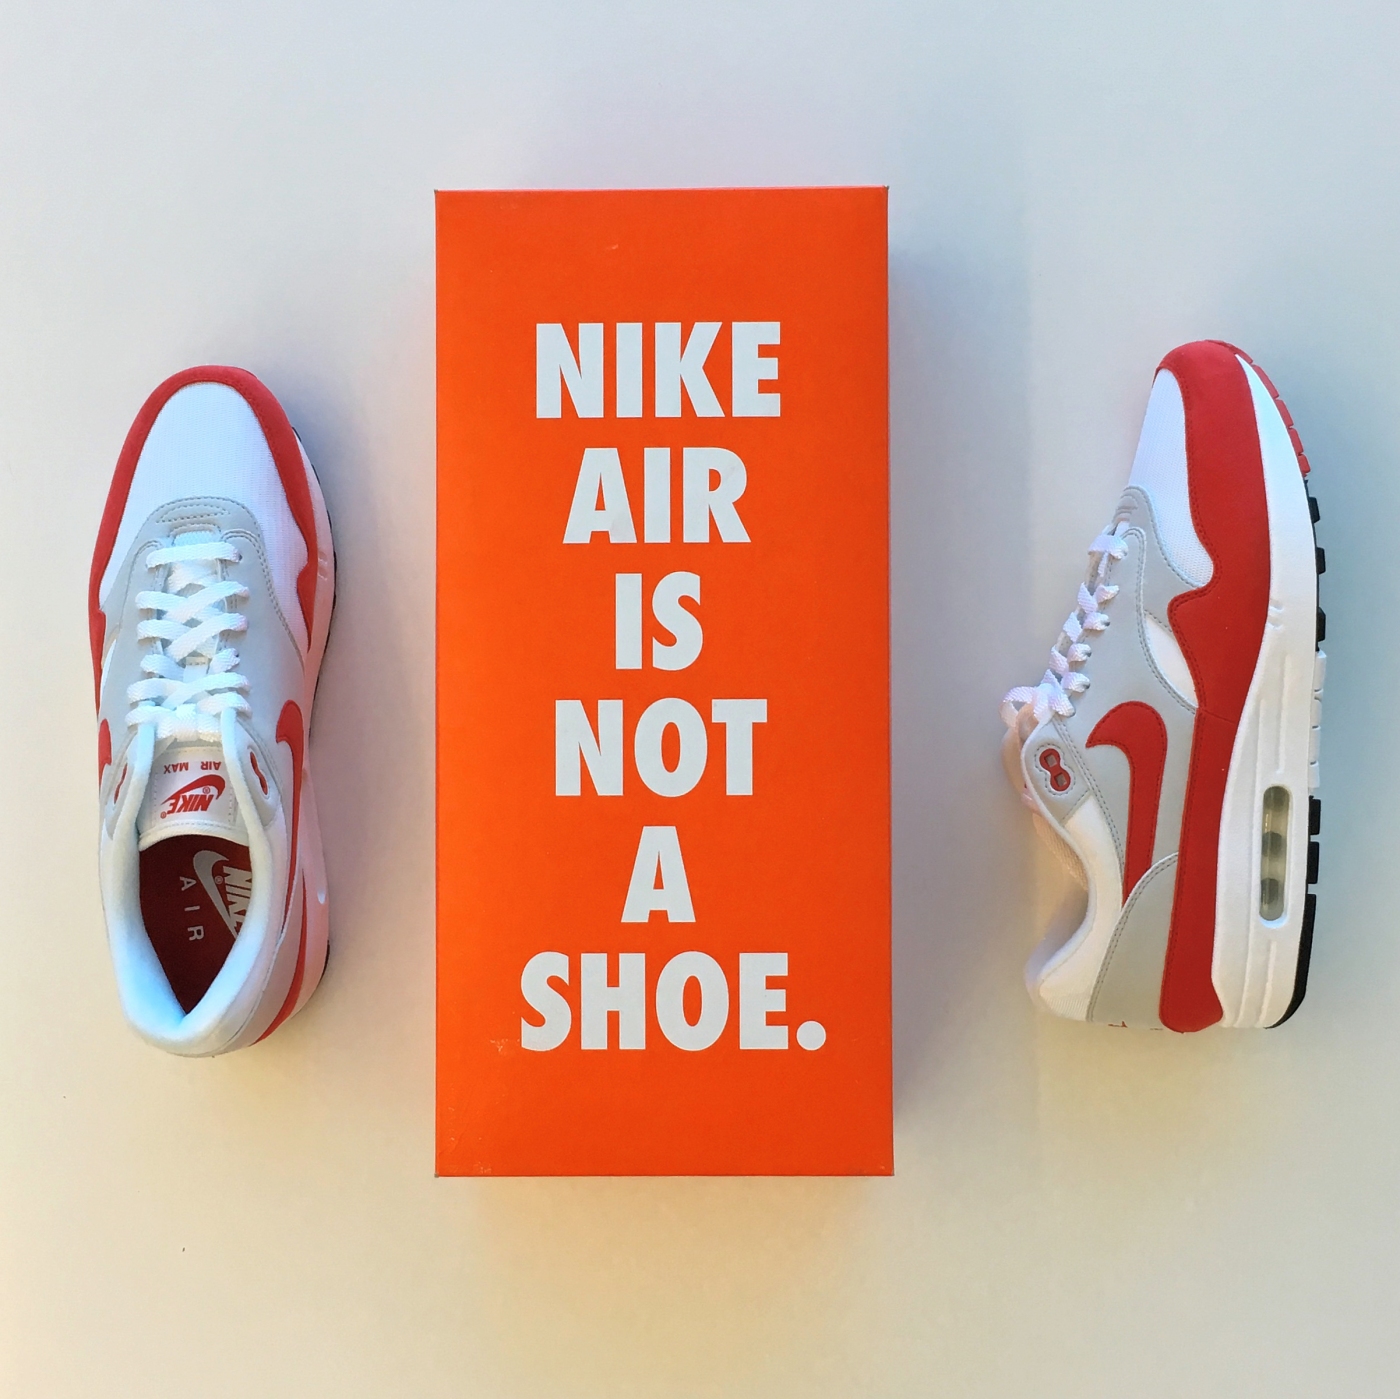 Nike Air is not a shoe